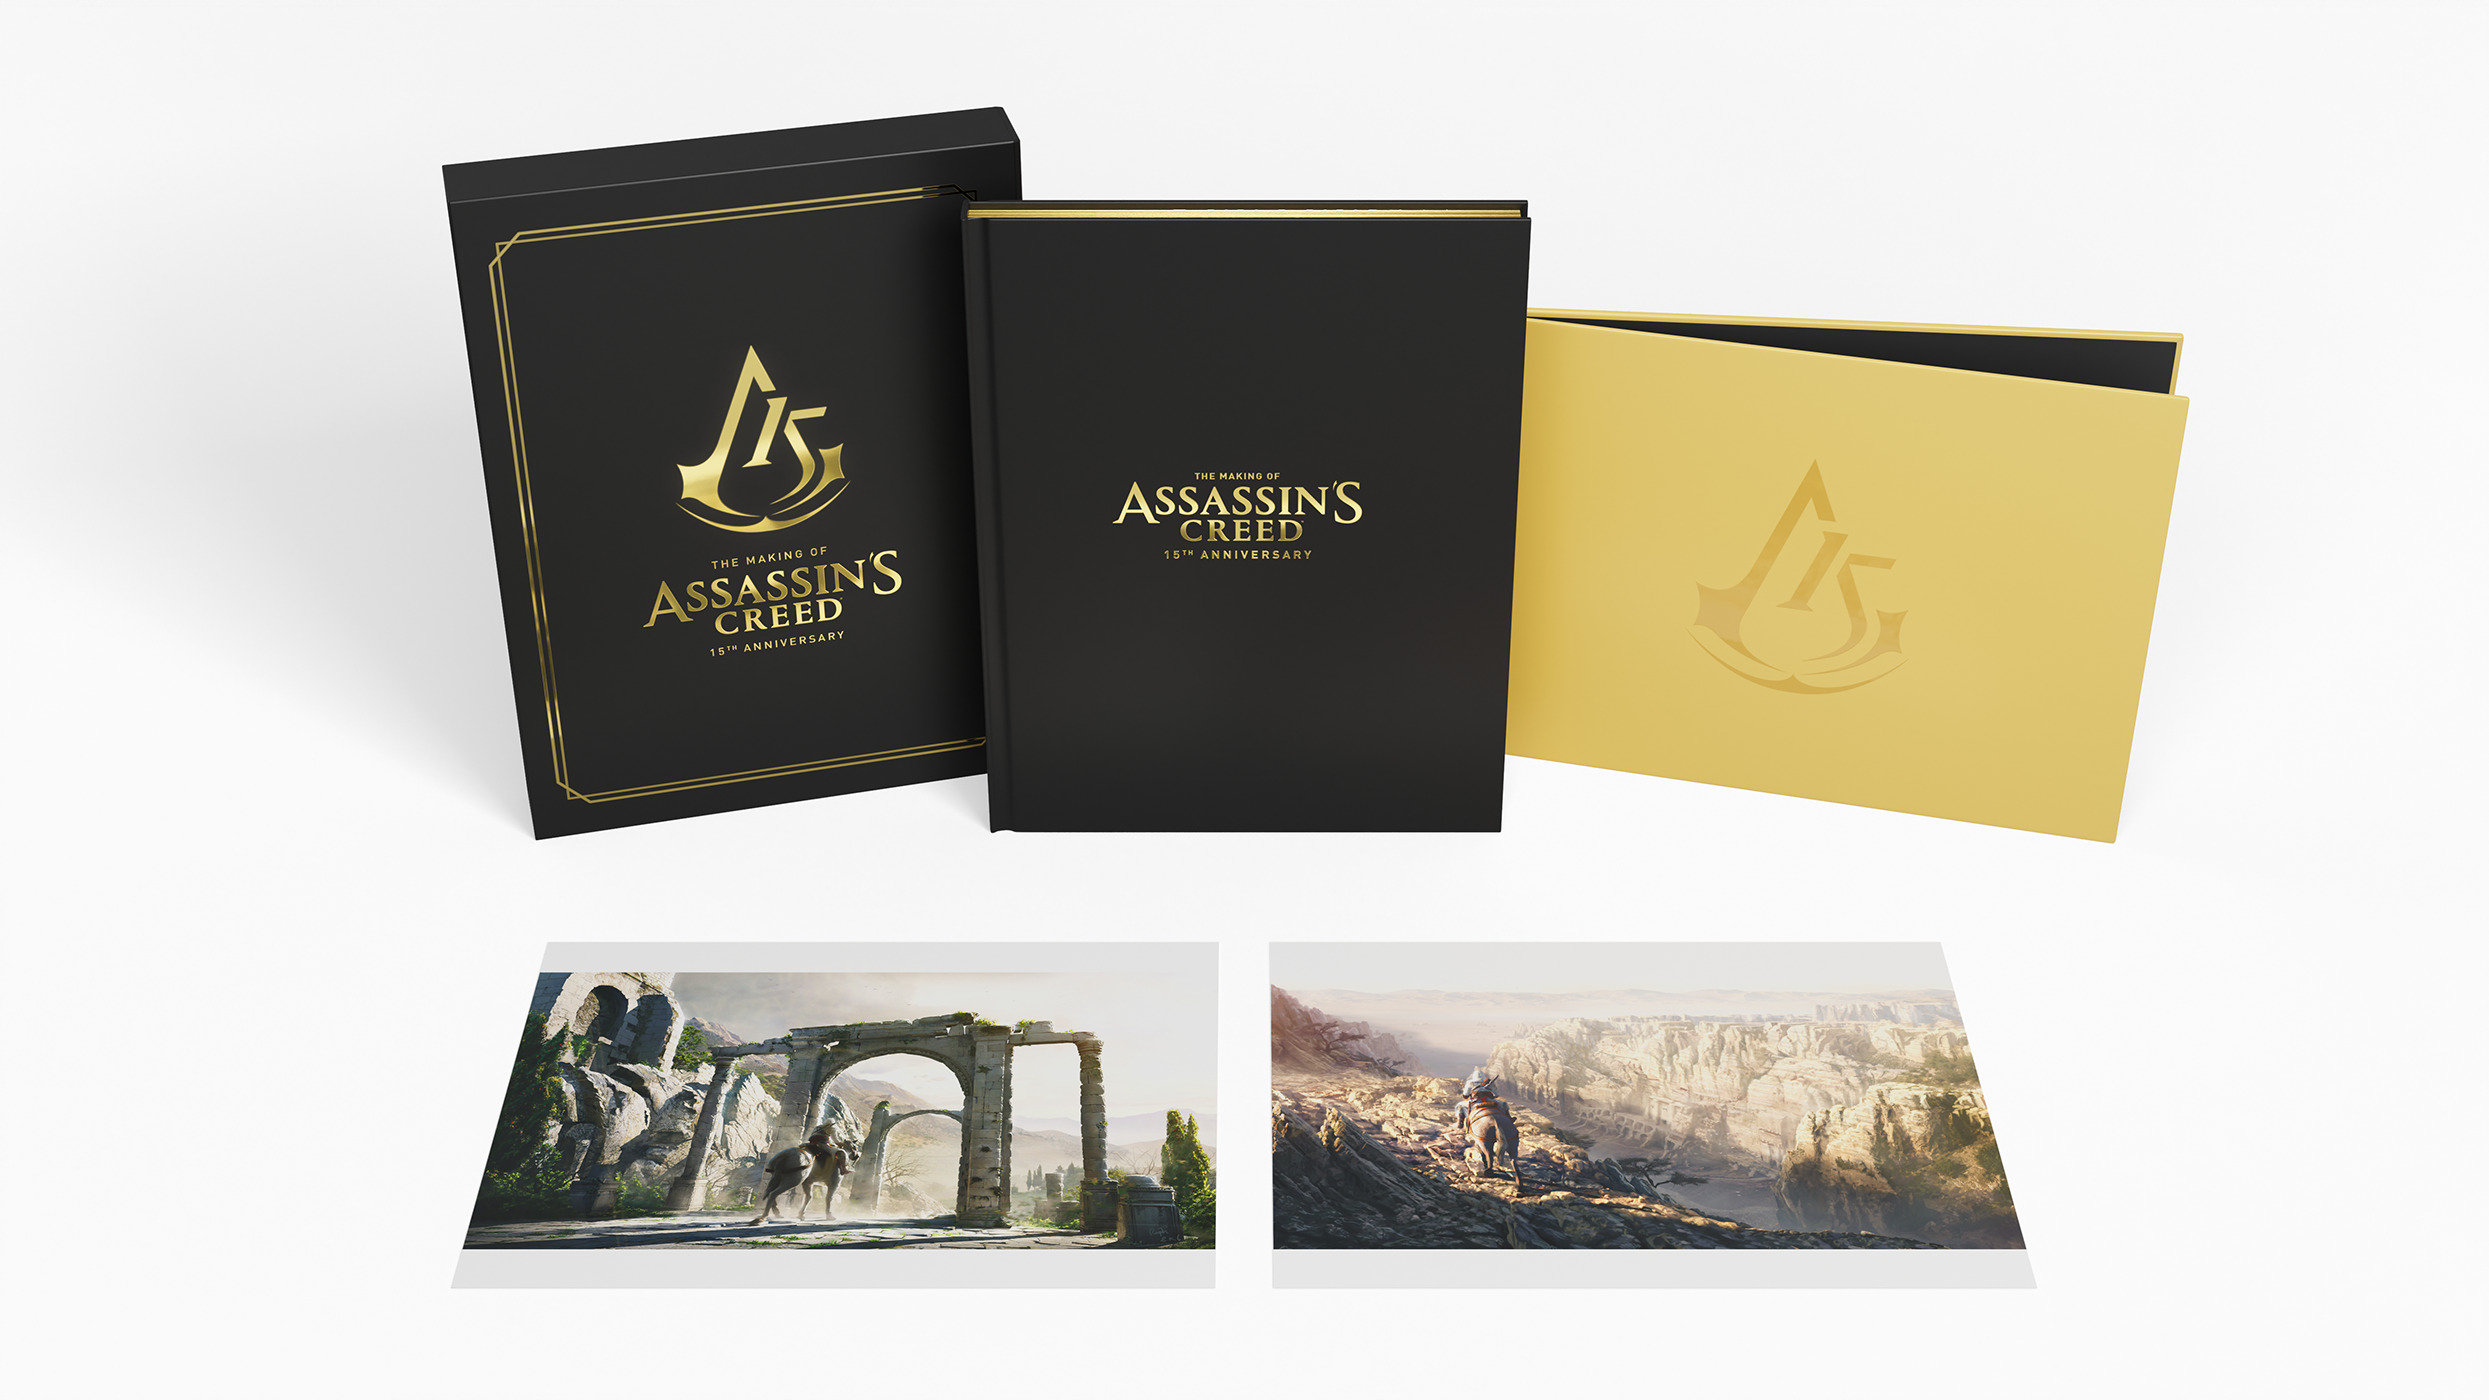 Making of Assassins Creed 15th Anniversary Deluxe Edition Hardcover